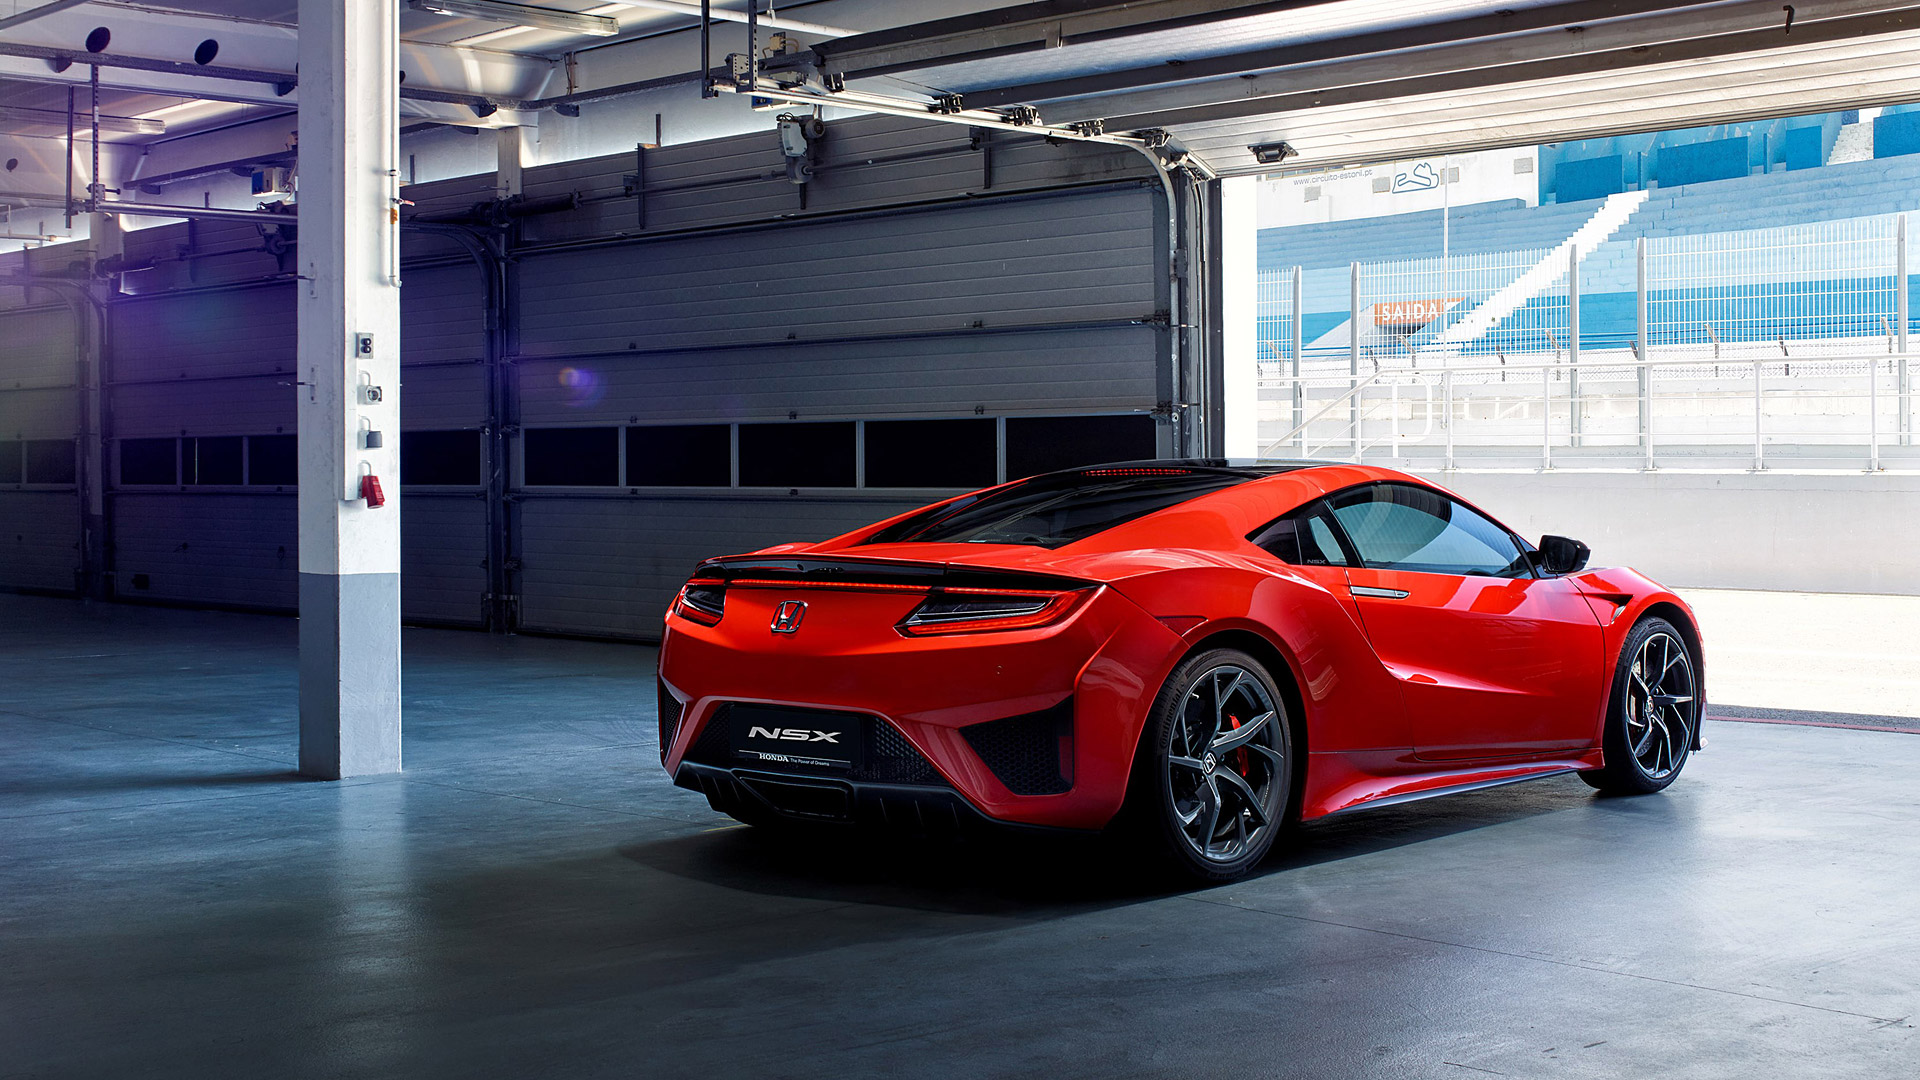 2017 Honda Nsx Picture - Acura Nsx Wallpaper Phone , HD Wallpaper & Backgrounds